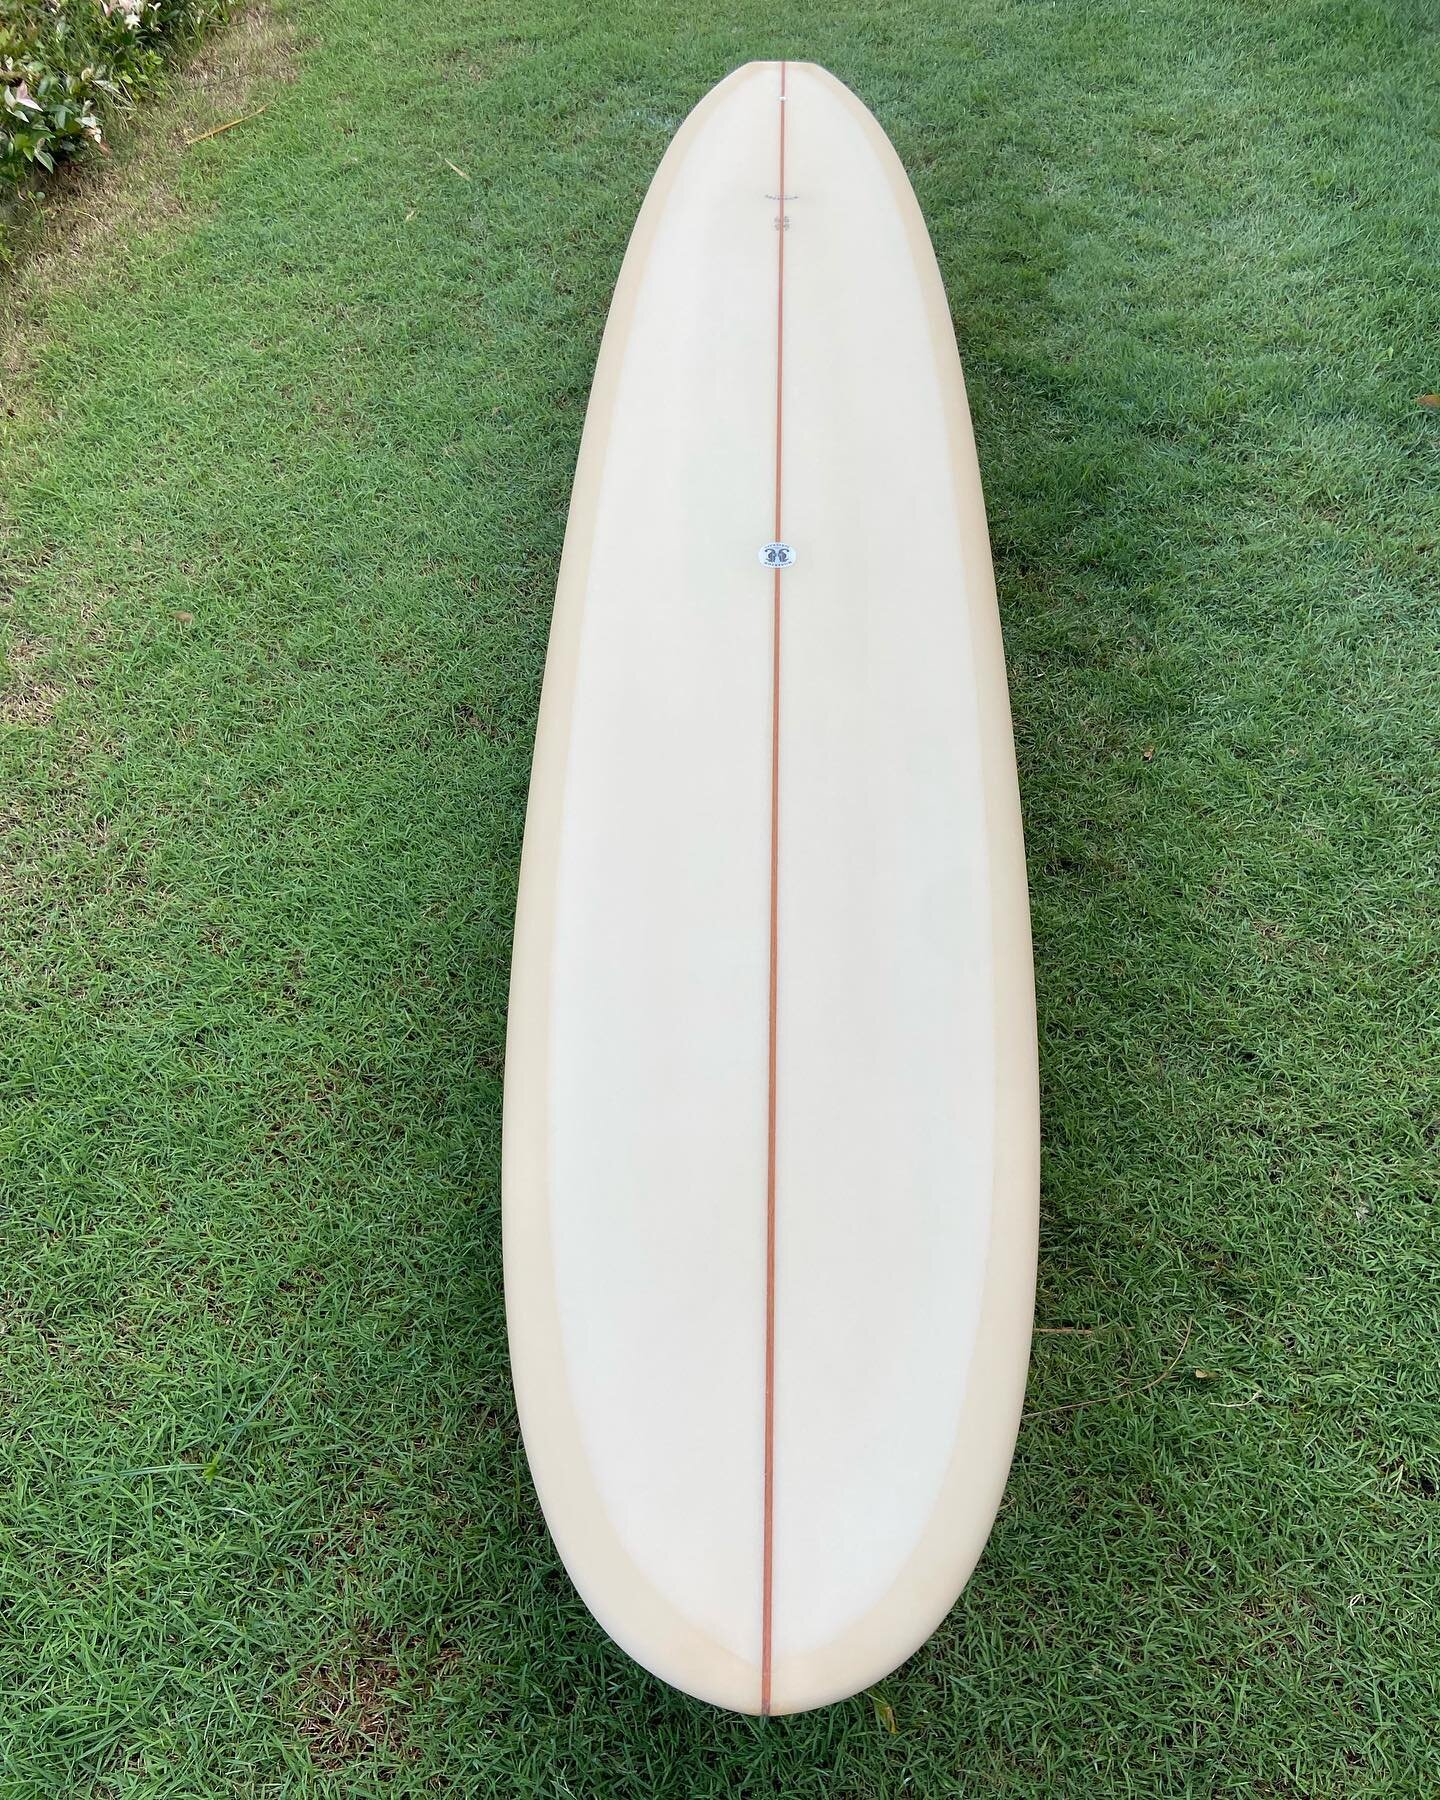 9&rsquo;4&rdquo; &bull;impala&bull; #custom for Alejandro Jarra @sunburntmess.surf .  Measures 22 ⅝ wide 2 13/16 thick, this board features a clean outline, refined 50/50 rails, balanced rocker, single nose concave splitting a rolled vee bottom. Glas